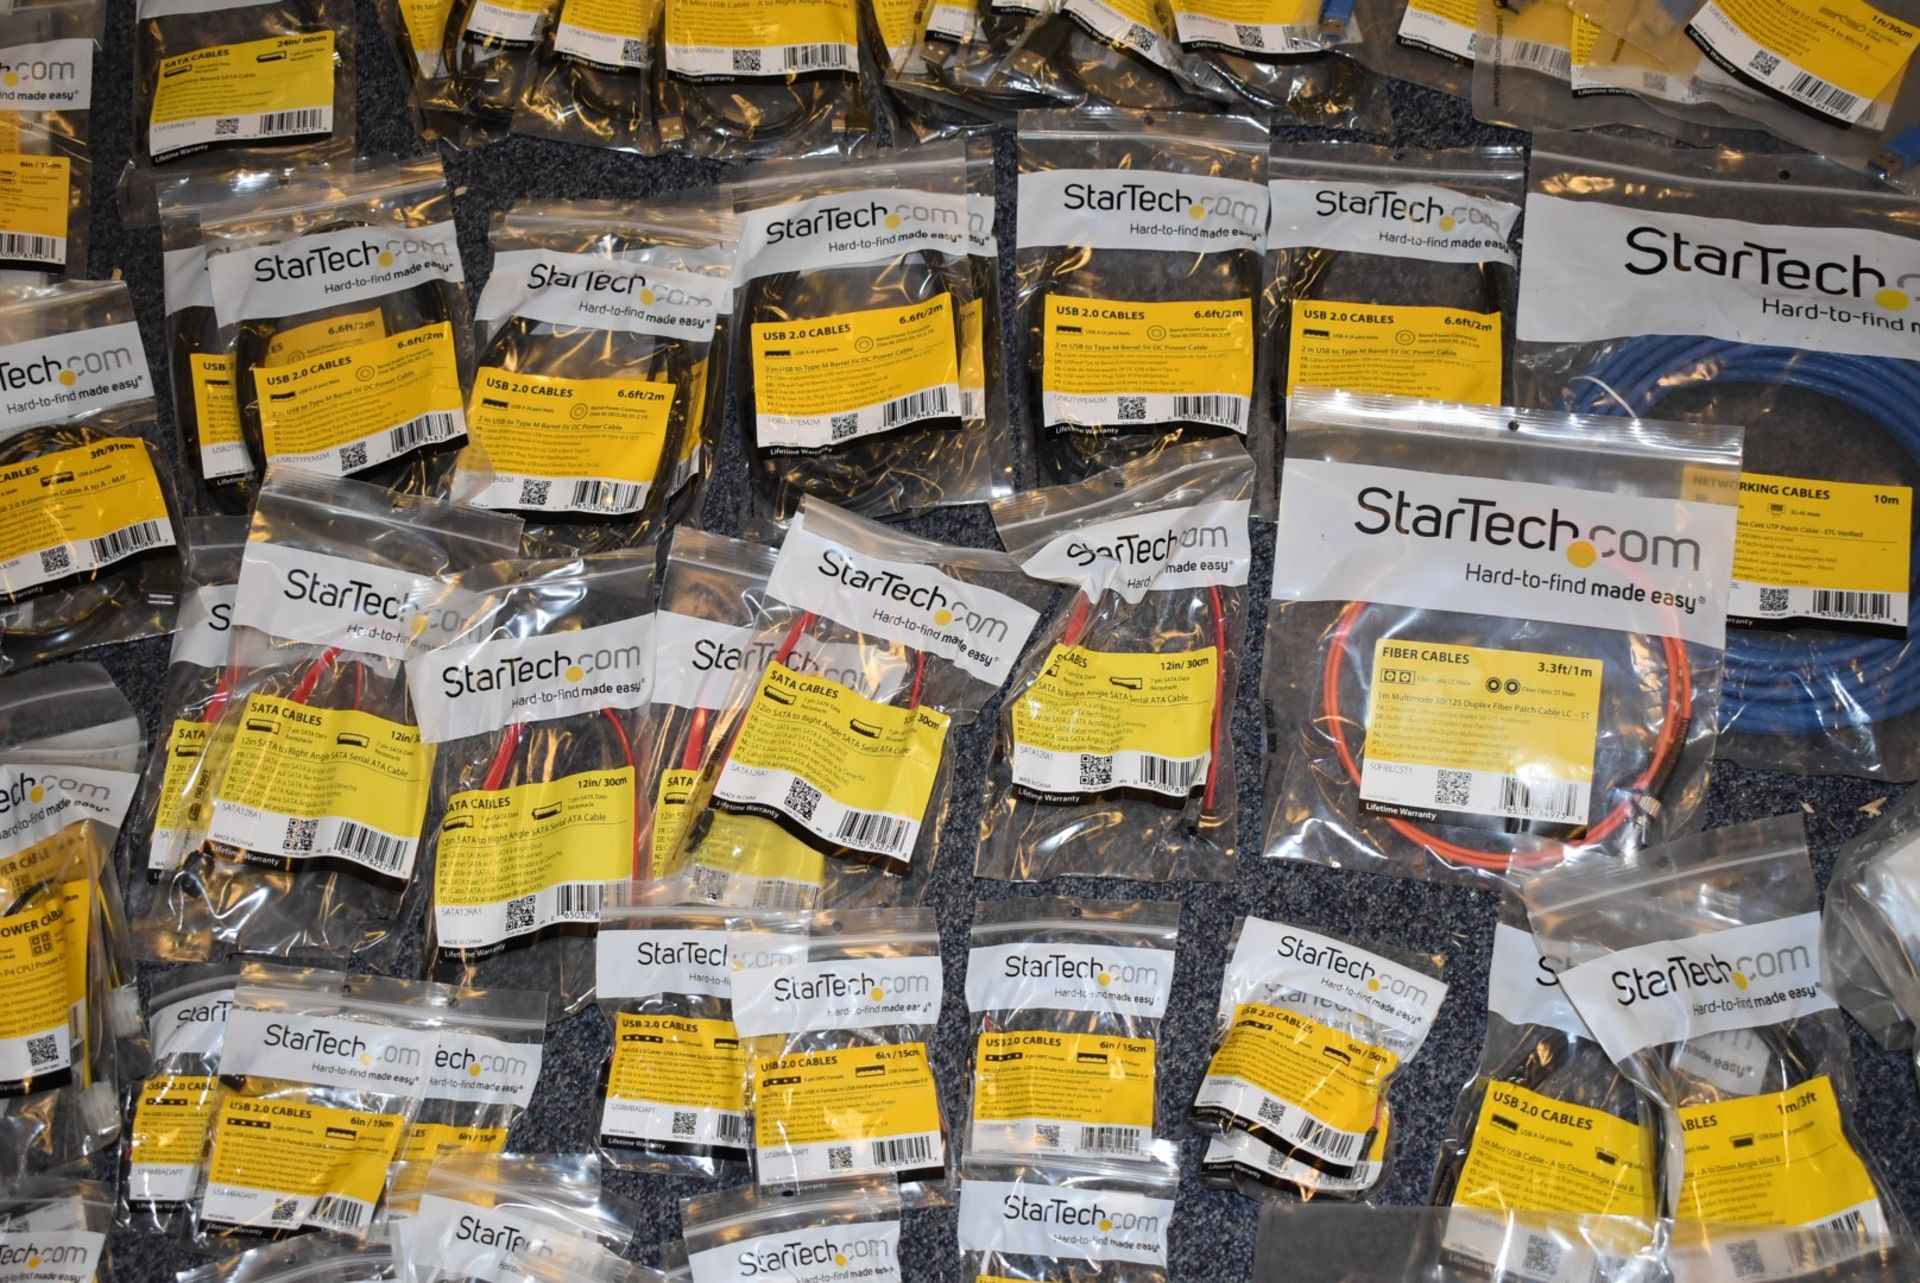 177 x Assorted StarTech Cables - Huge Lot in Original Packing - Various Cables Included - Image 26 of 50